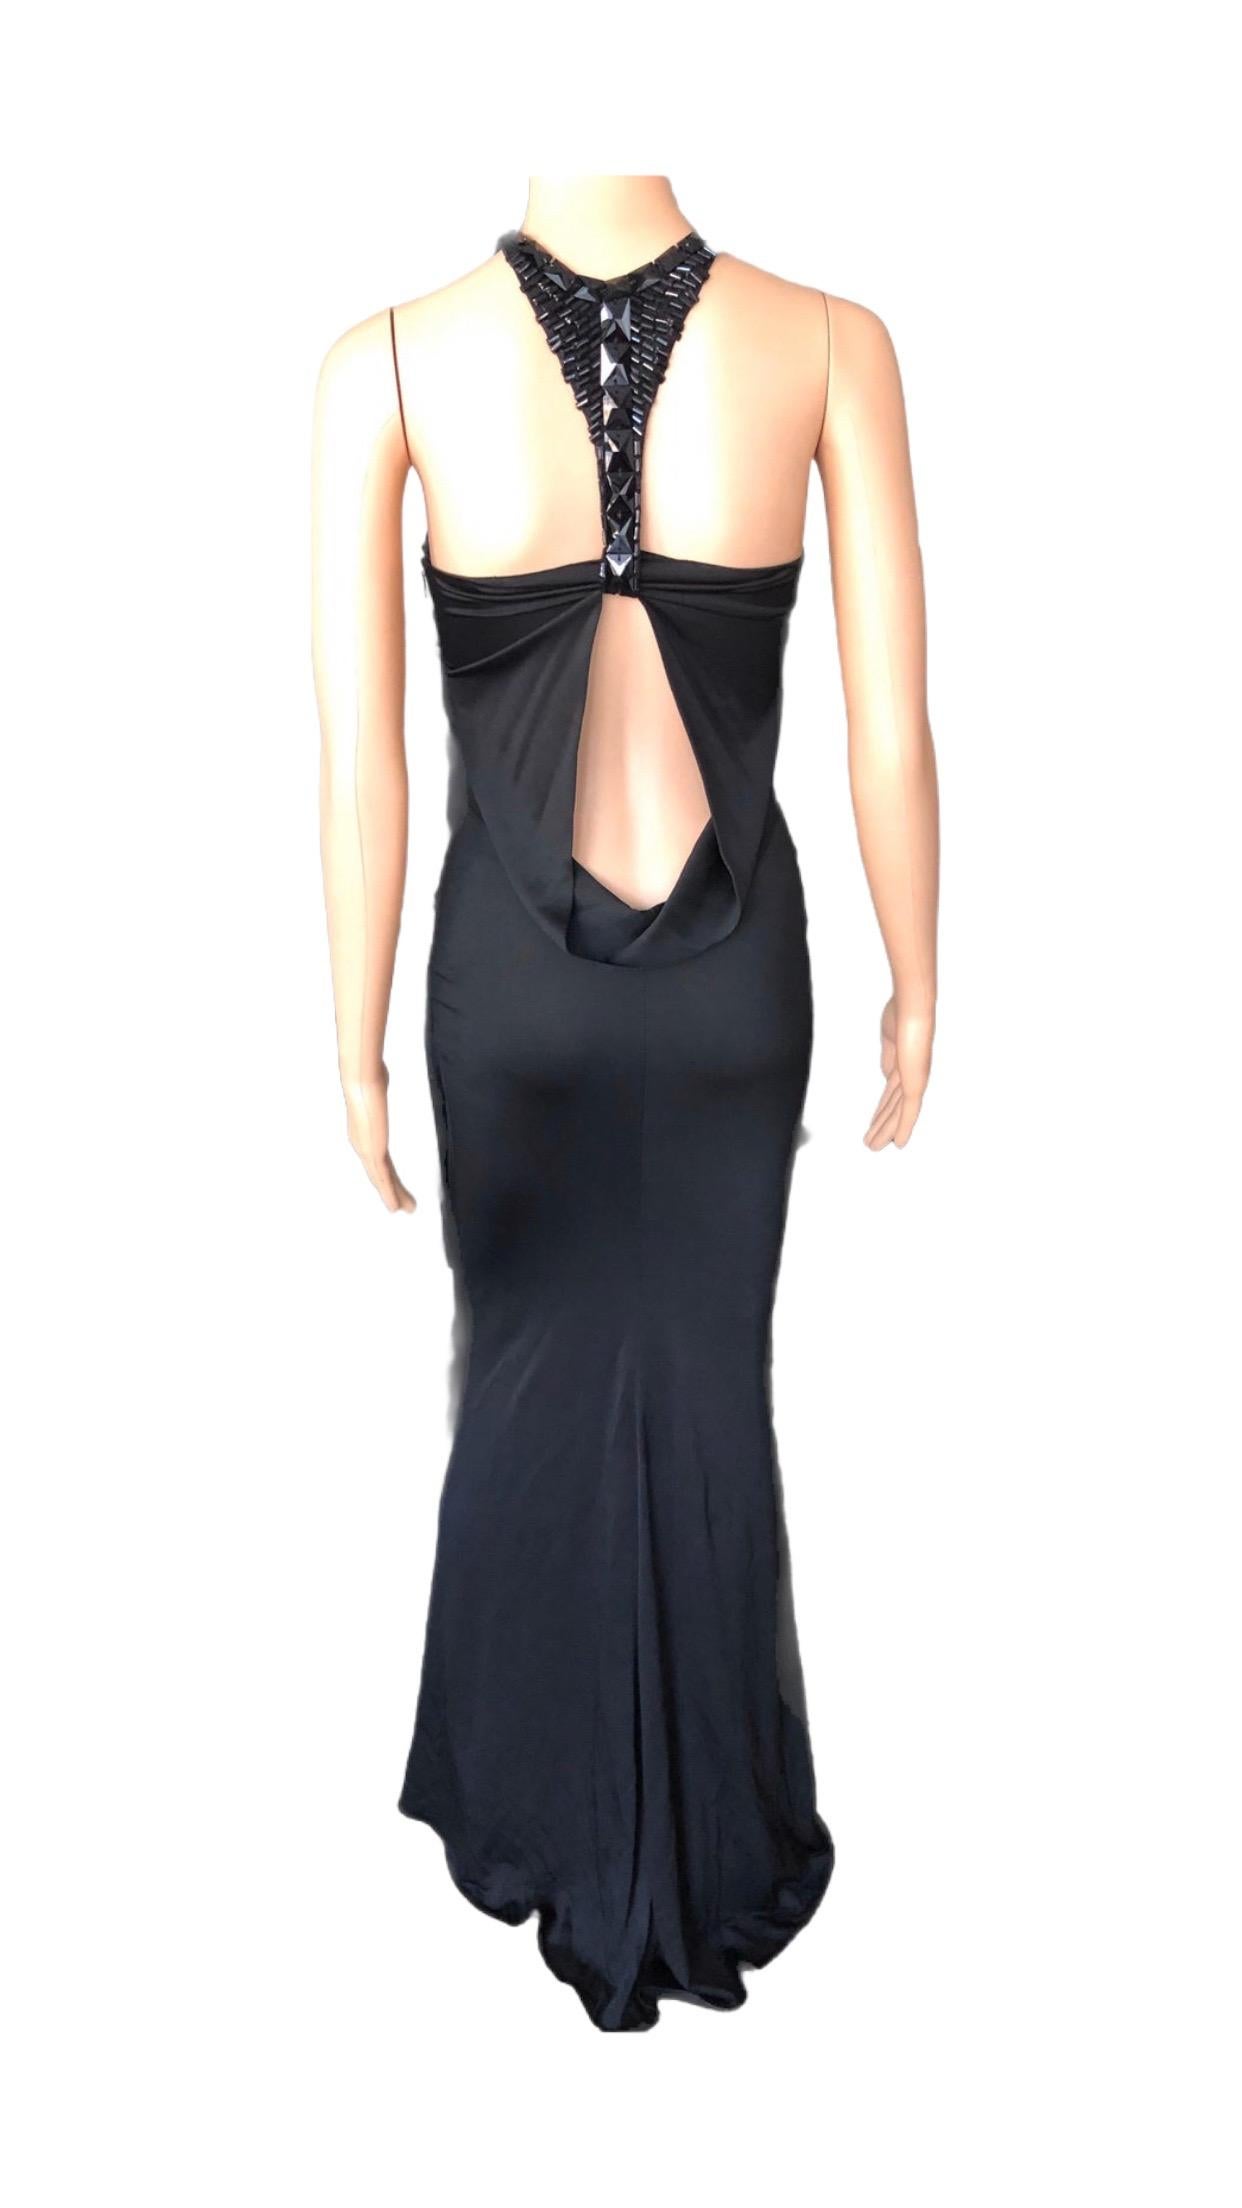 Tom Ford for Gucci F/W 2004 Embellished Plunging Cutout Black Evening Dress Gown For Sale 7